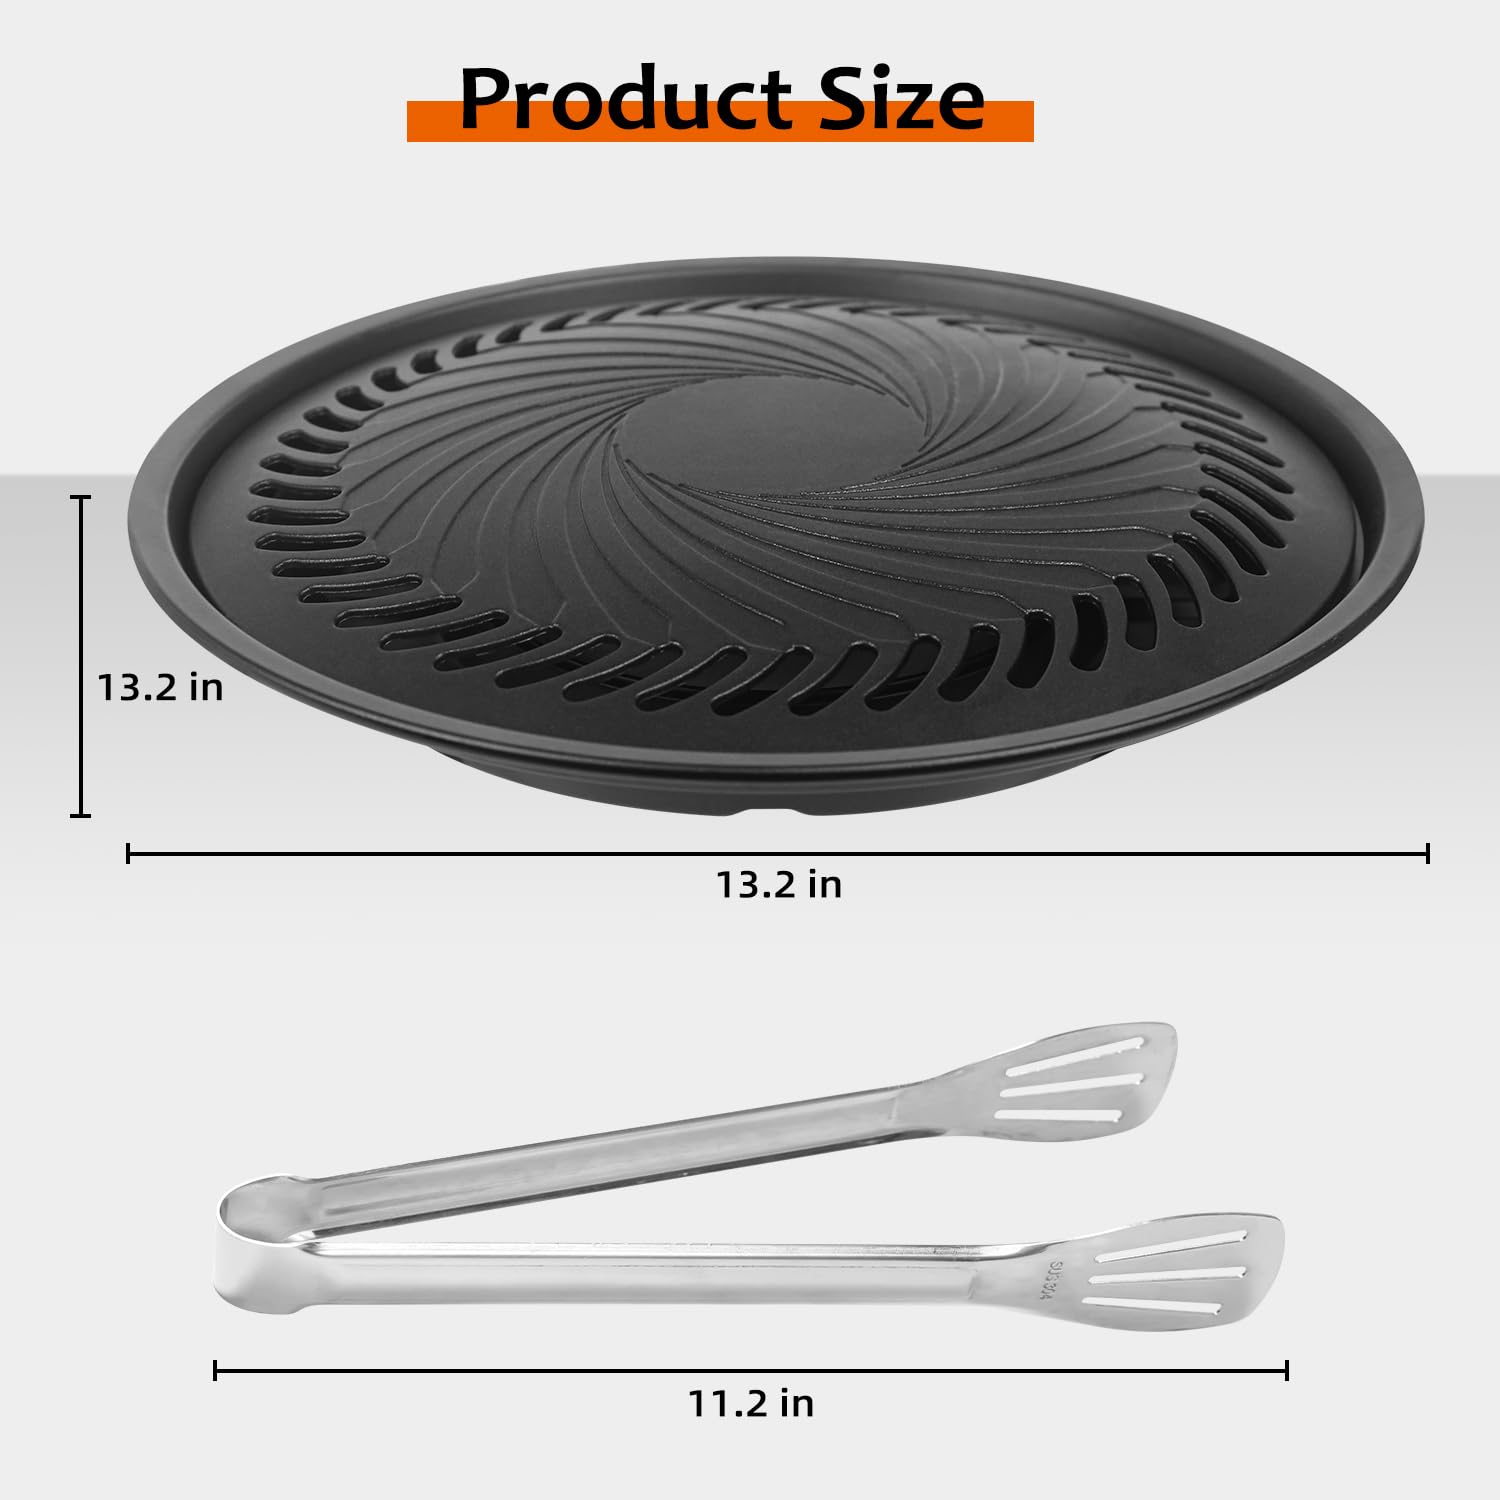 Japan BBQ Plate (Large) | Stovetop Korean BBQ Non-Stick Round Barbecue Grill Pan by Fapend | Free 304 Stainless Steel Barbecue Tongs (Japan Import)